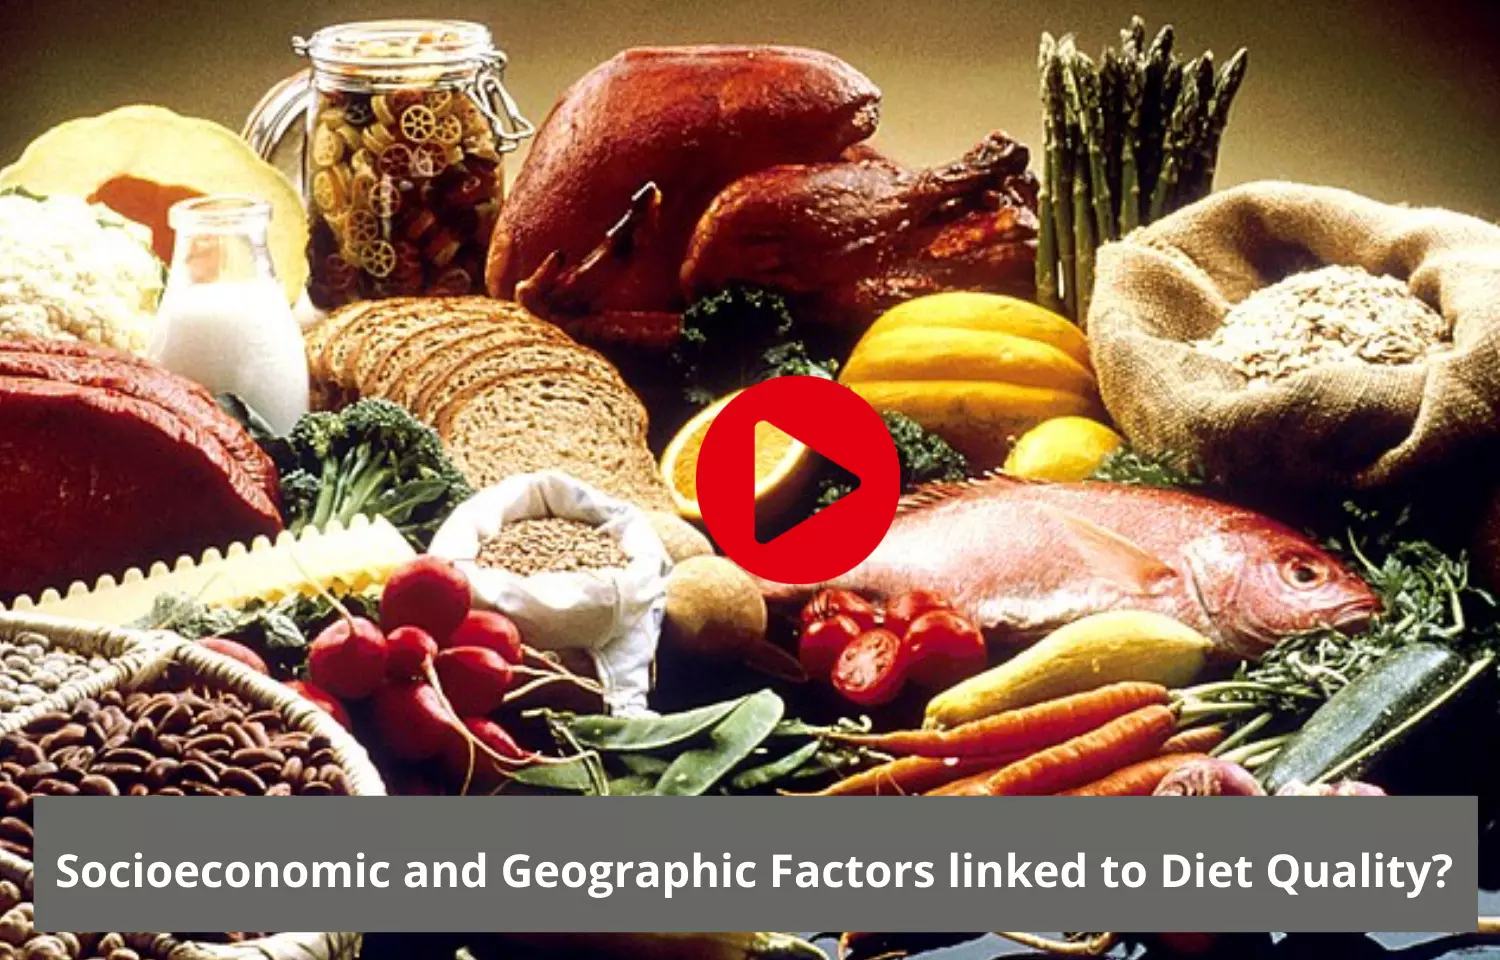 Socioeconomic and Geographic Factors linked to Diet Quality?